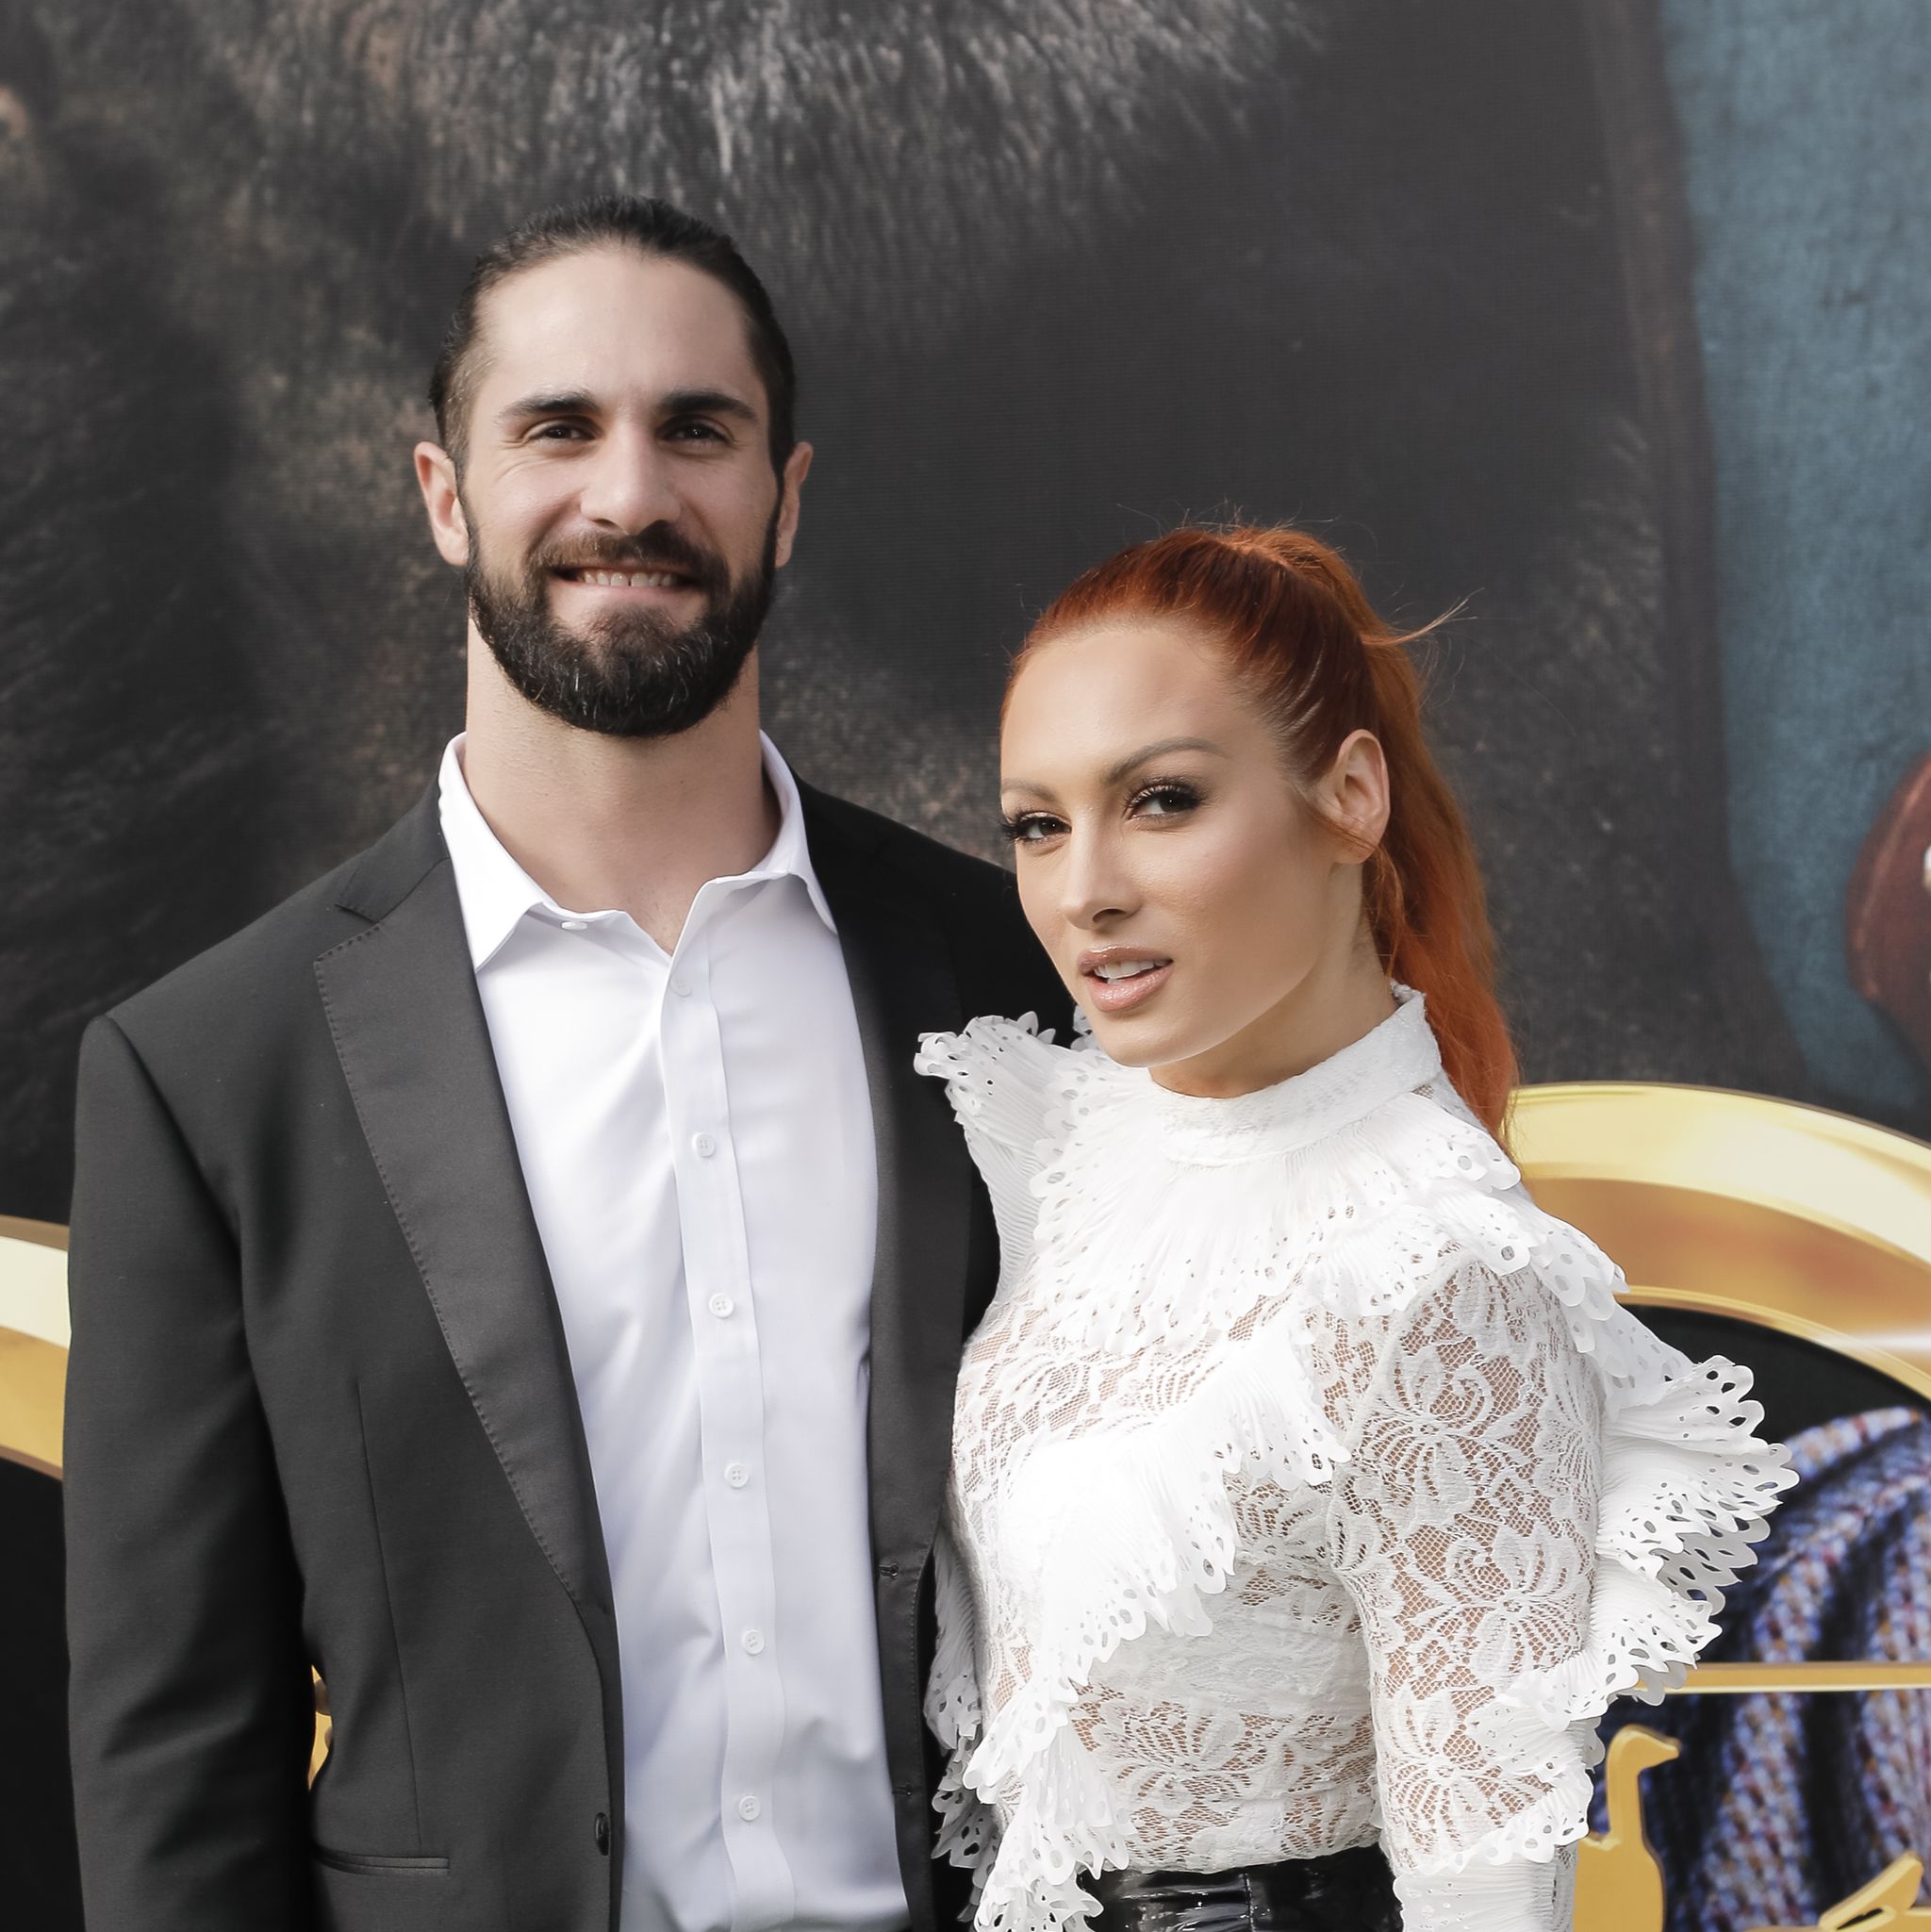 WWE's Becky Lynch Gives Birth to 1st Child With Fiance Seth Rollins